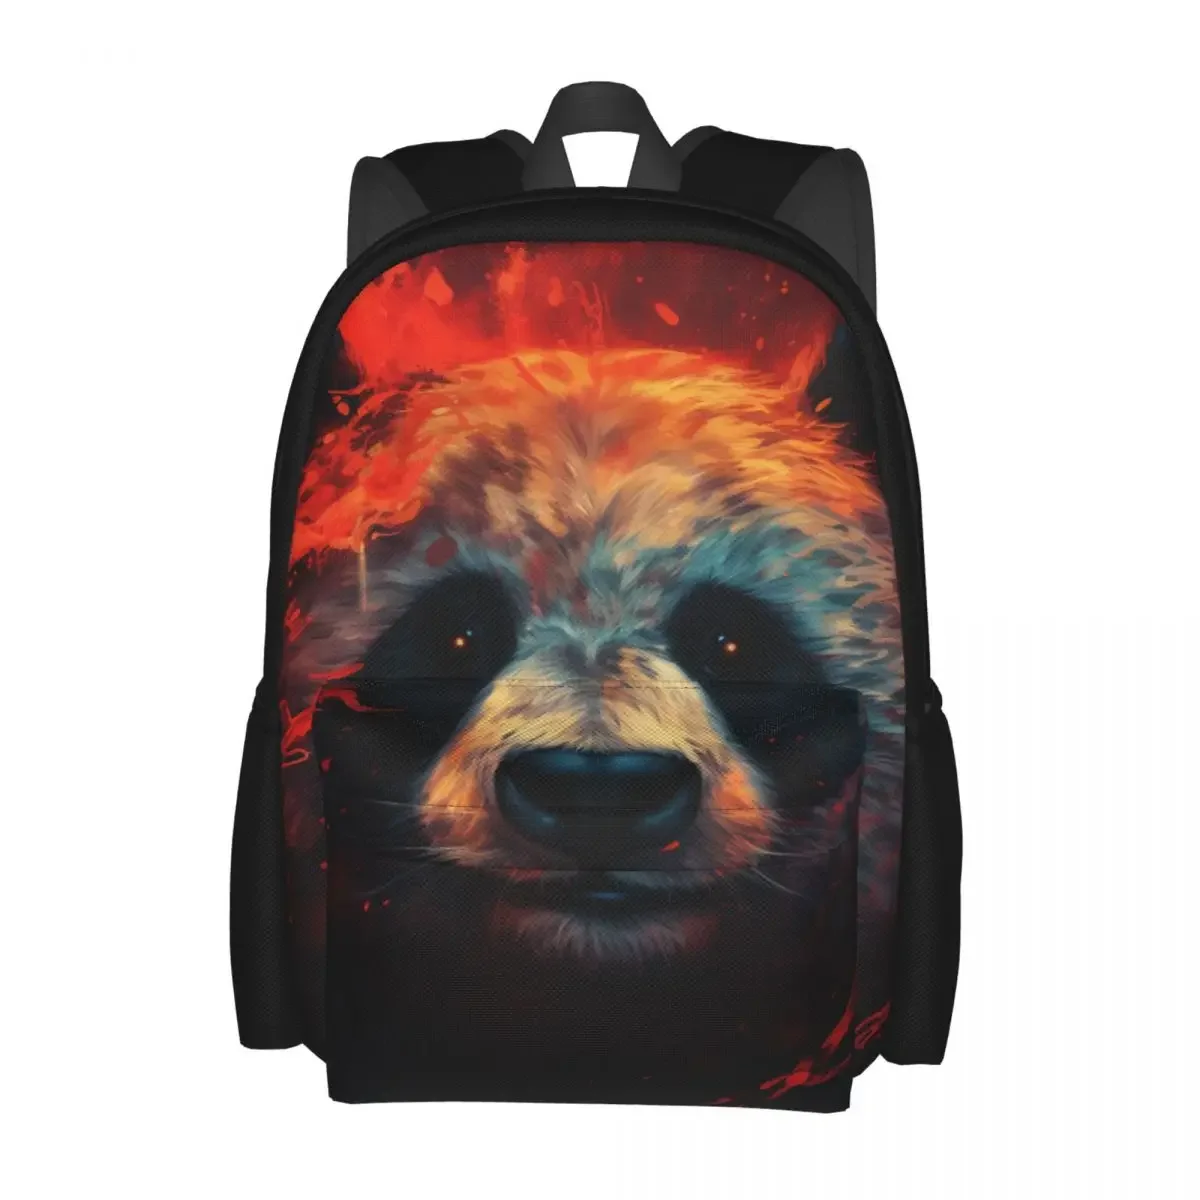 

Panda Backpack Unisex Grotesque Realism Durable Backpacks Polyester Fashion School Bags College High Quality Rucksack